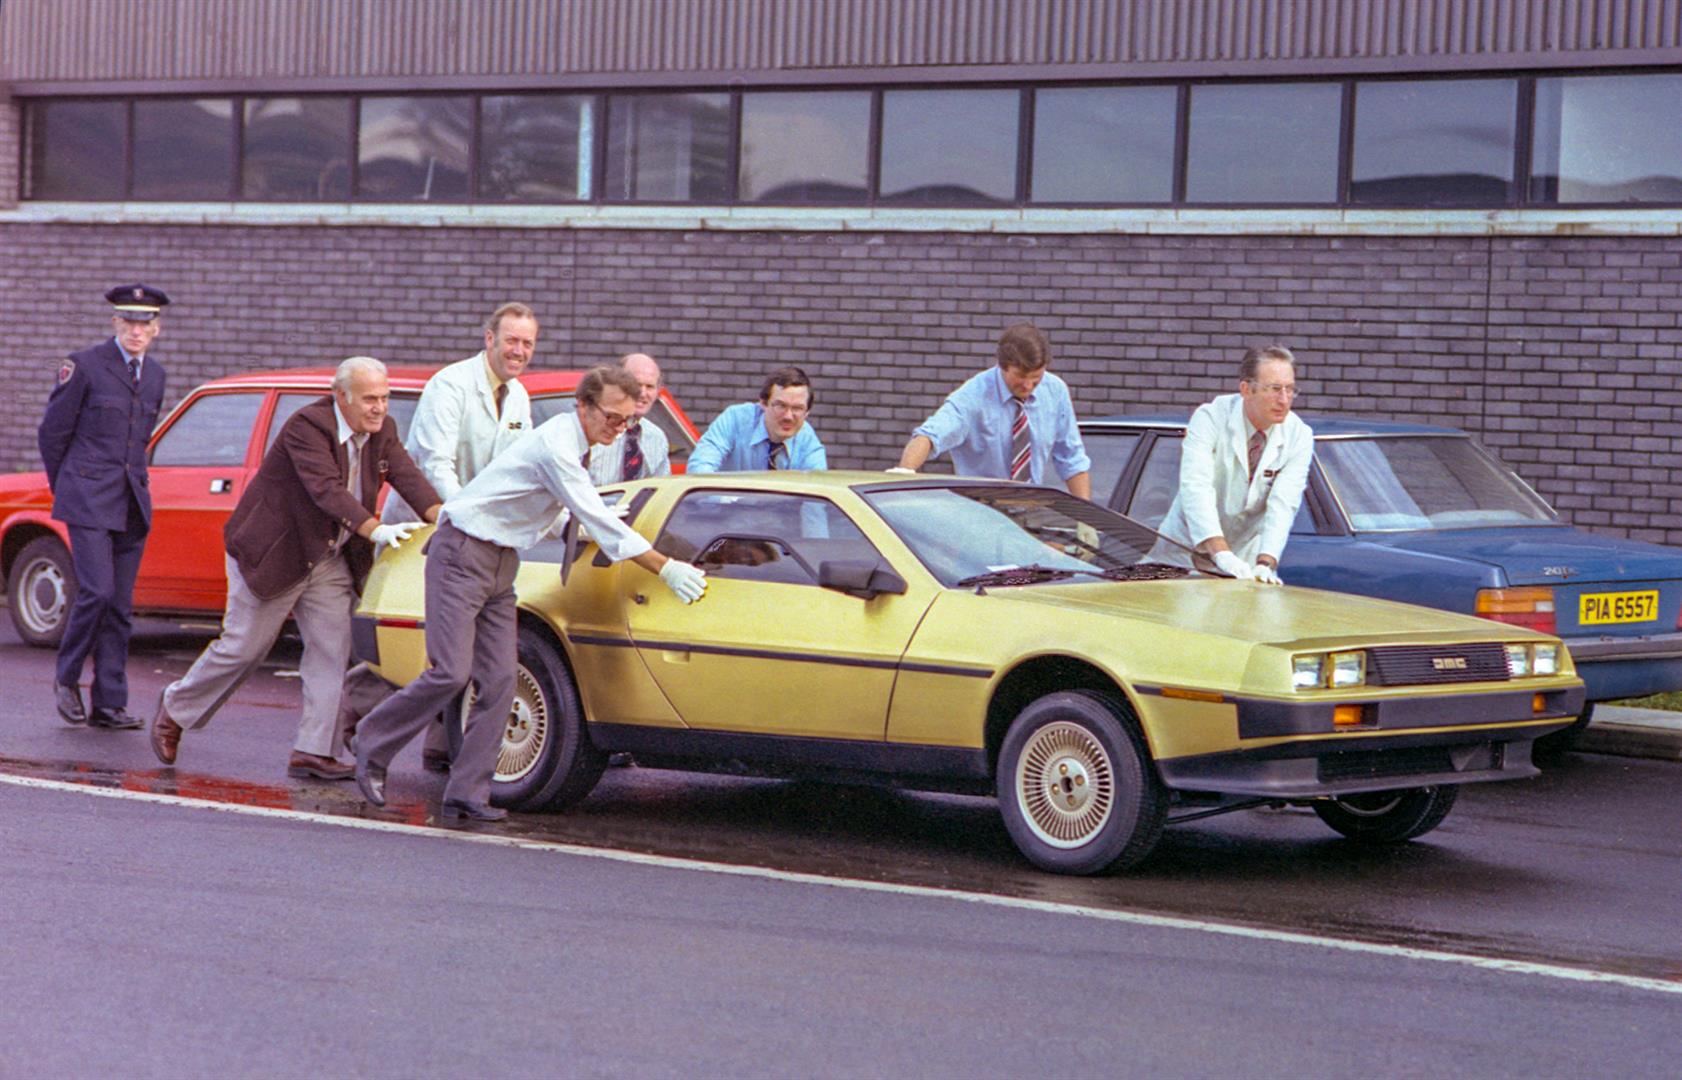 Moving the Gold car, with Tony McDade at rear and Dick Kendall second from the left | DeLoreanDirectory.com